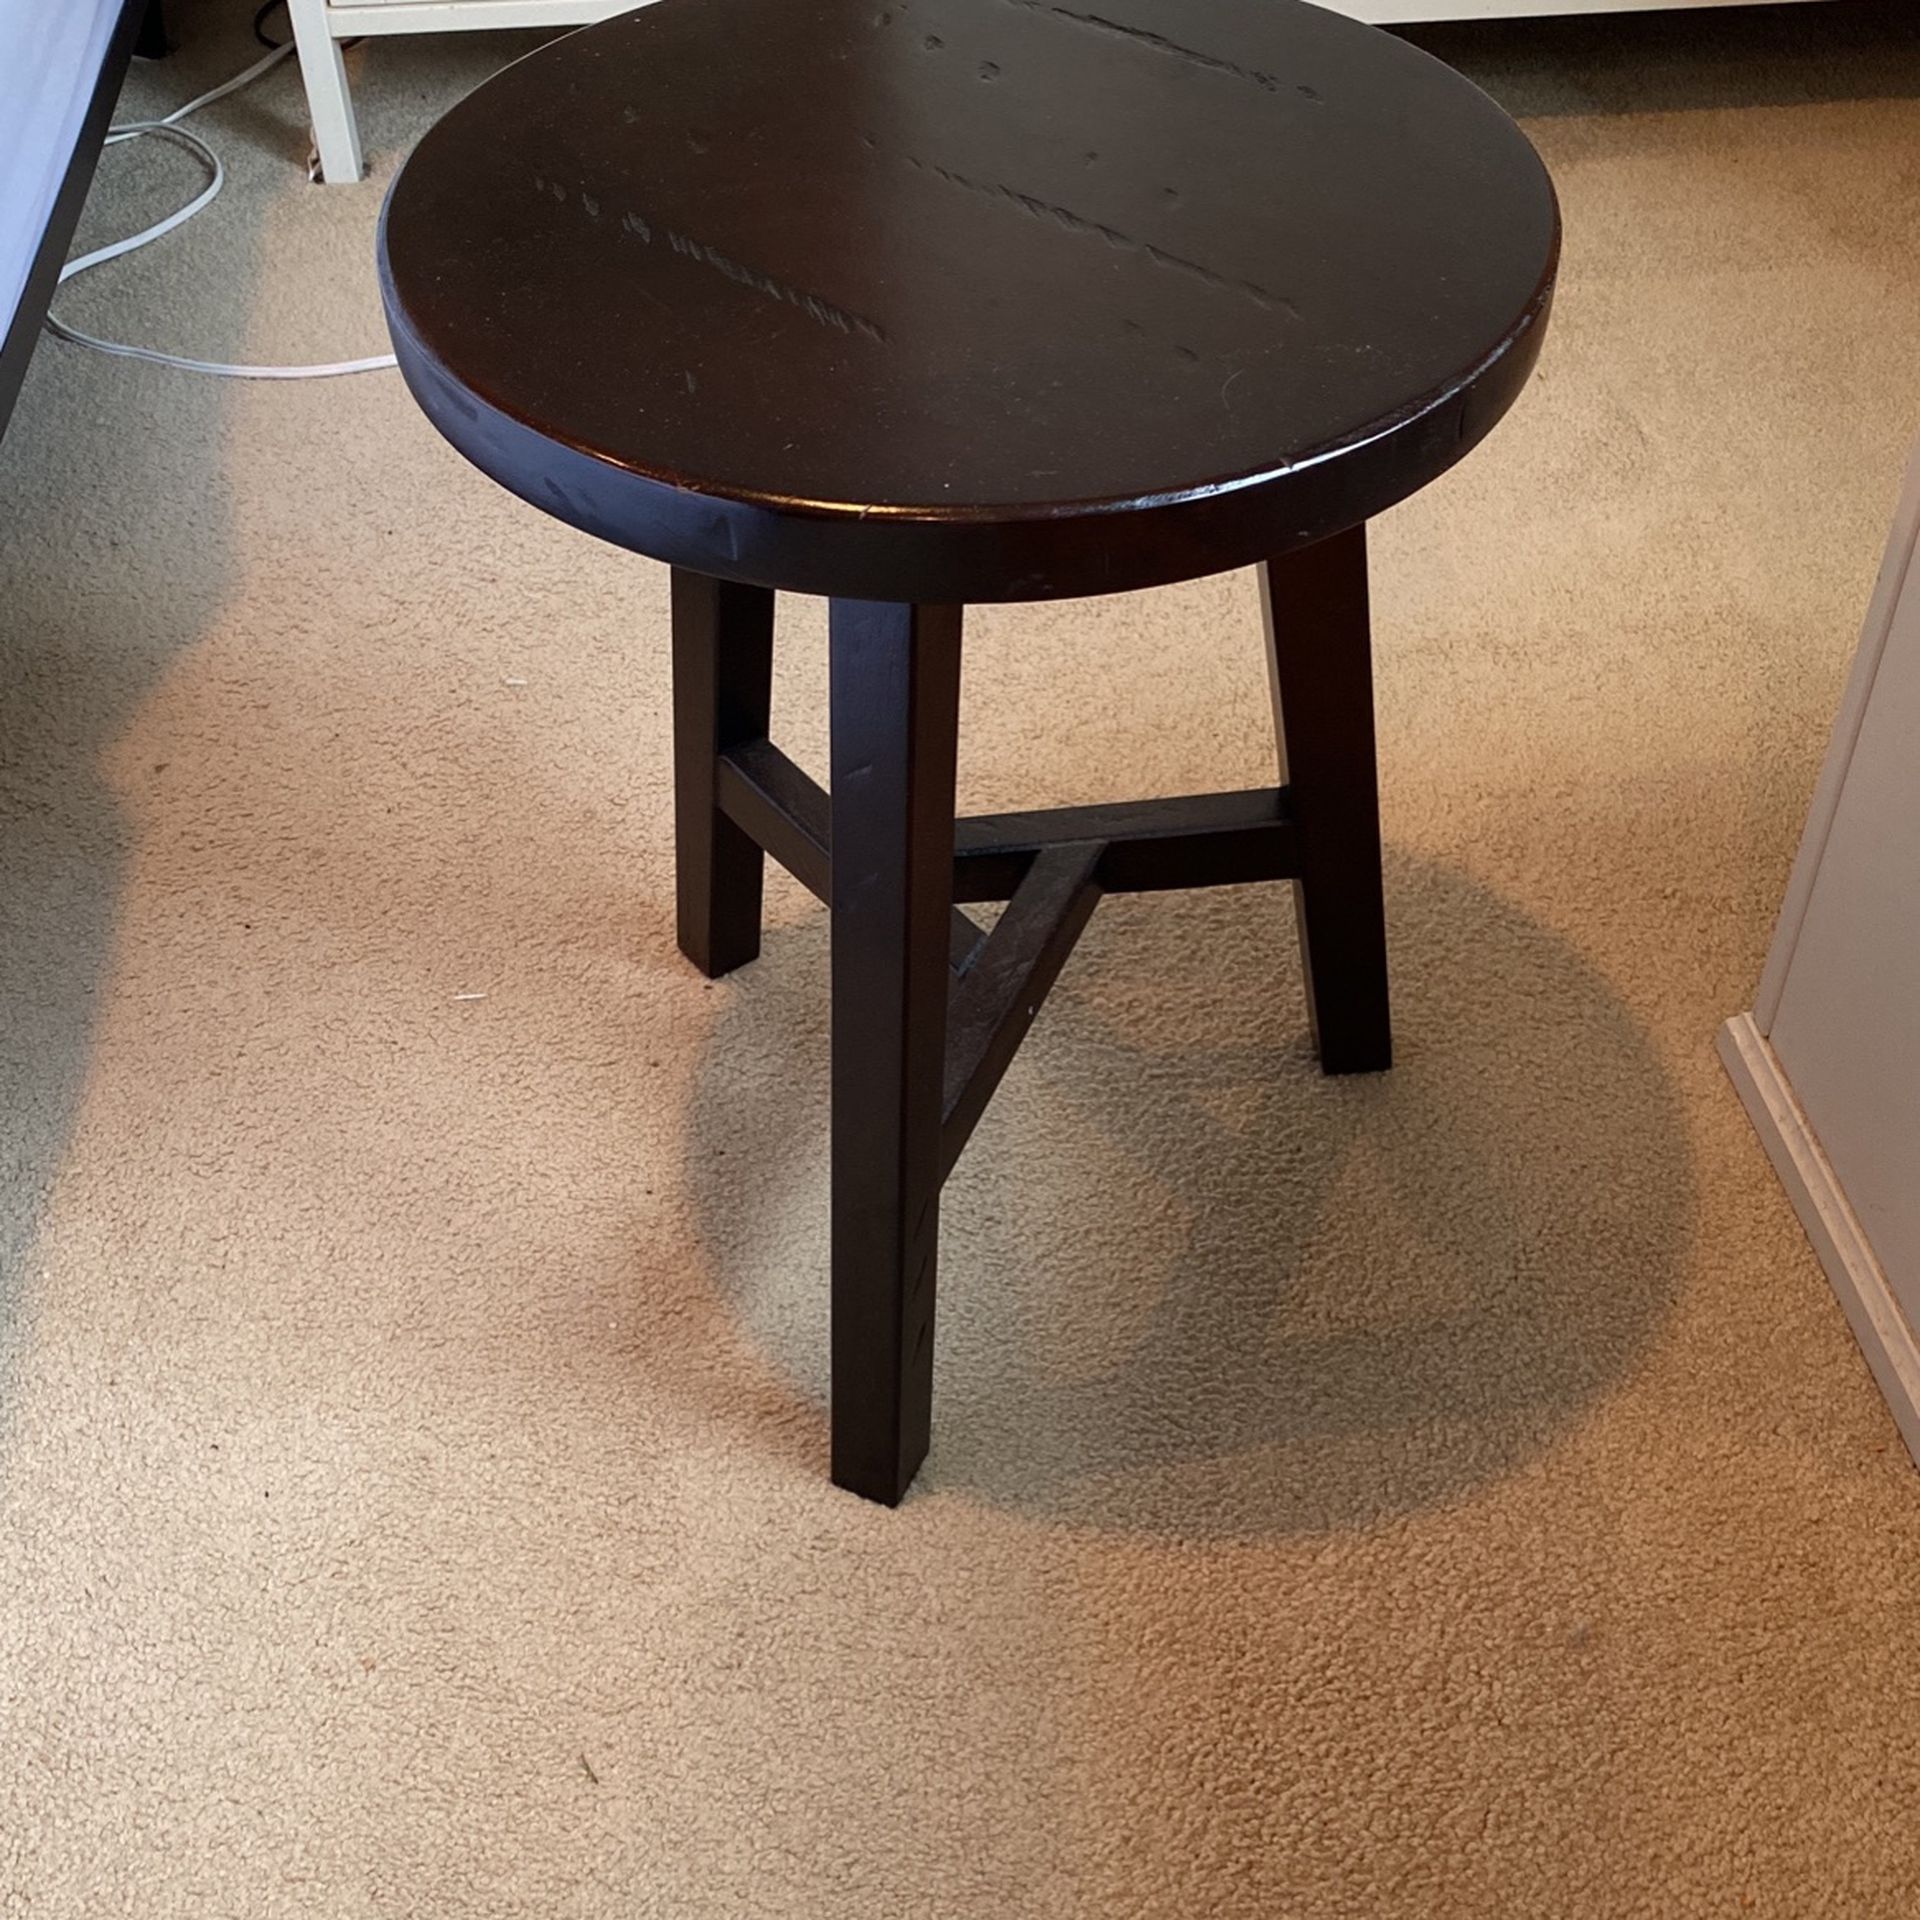 Solid Wood Stool Approx 29” High